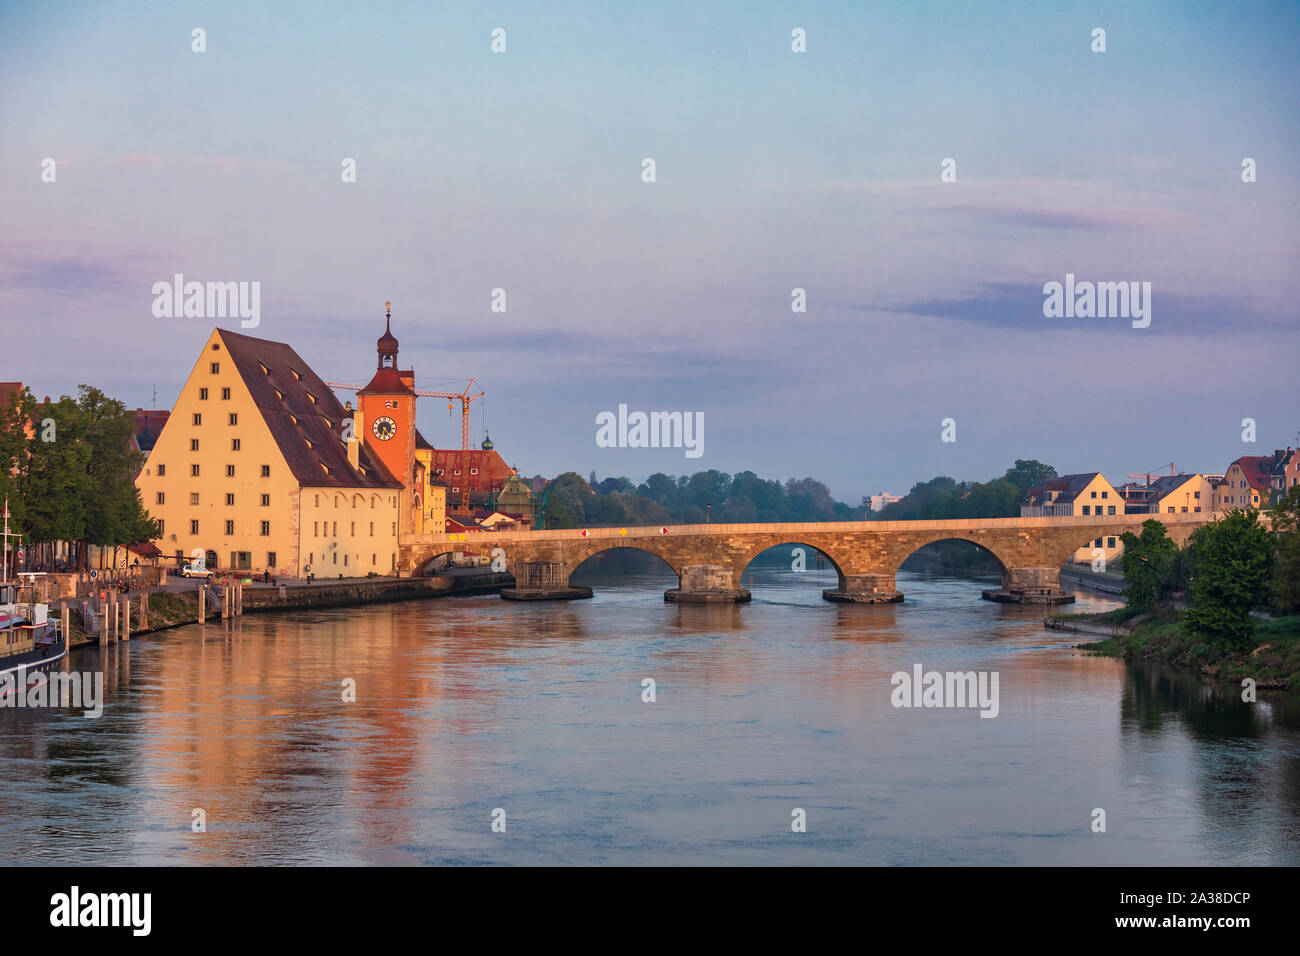 Regensburg cityscape with the medieval Stone Bridge (Steinerne Brücke) over the Danube river, Bavaria, Germany, Europe. Regensburg in one of most popu Stock Photo